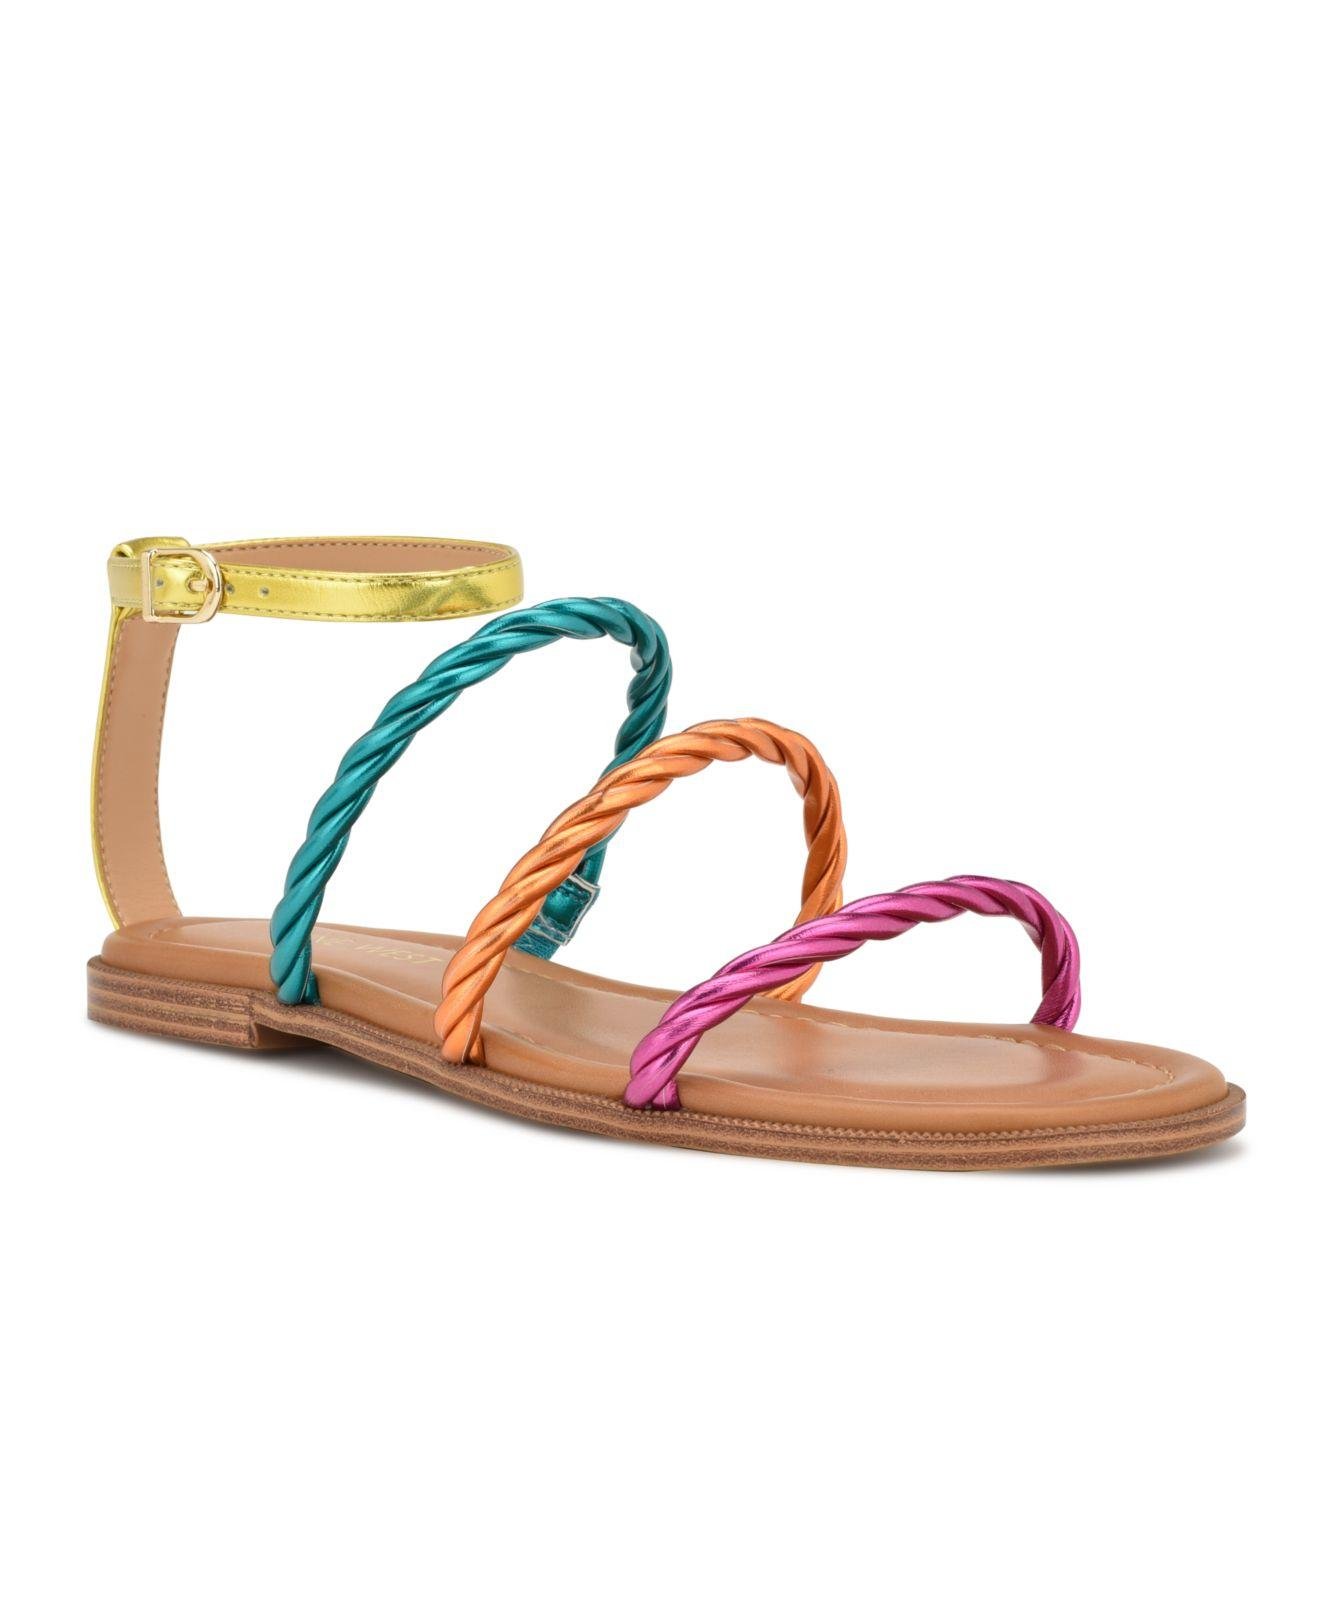 Nine West Ipster Round Toe Strappy Flat Sandals | Lyst